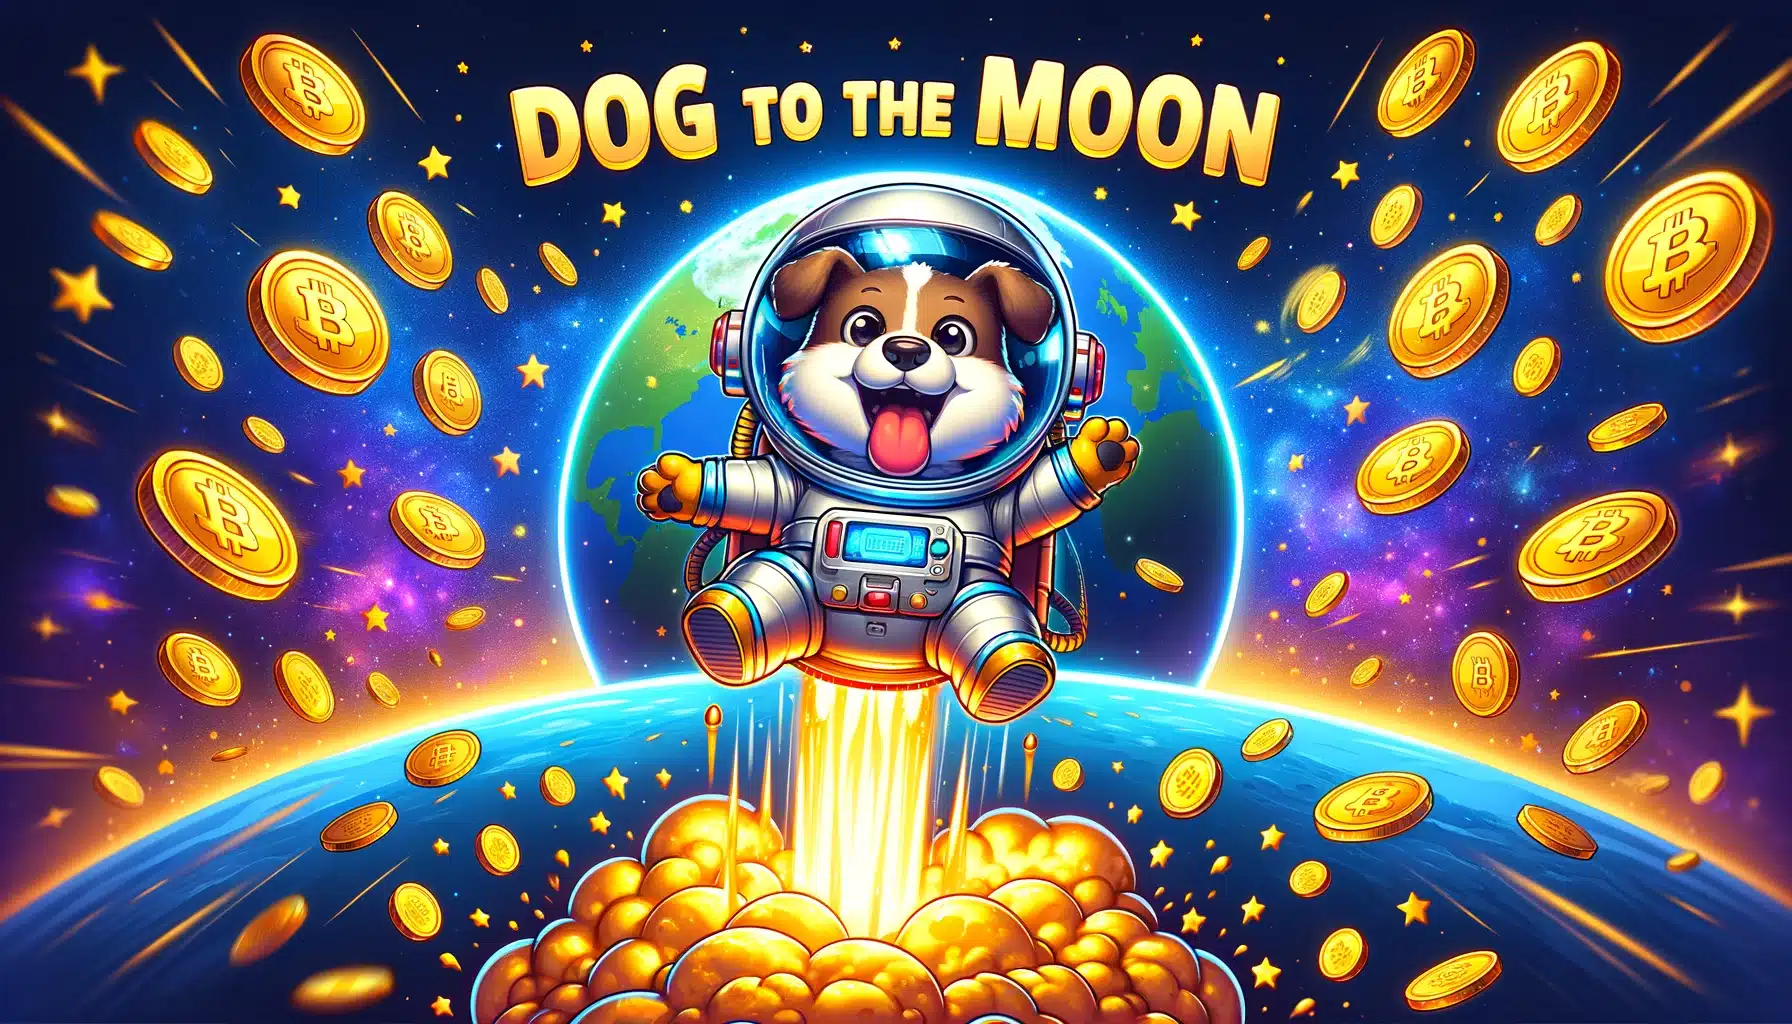 DOG to the moon